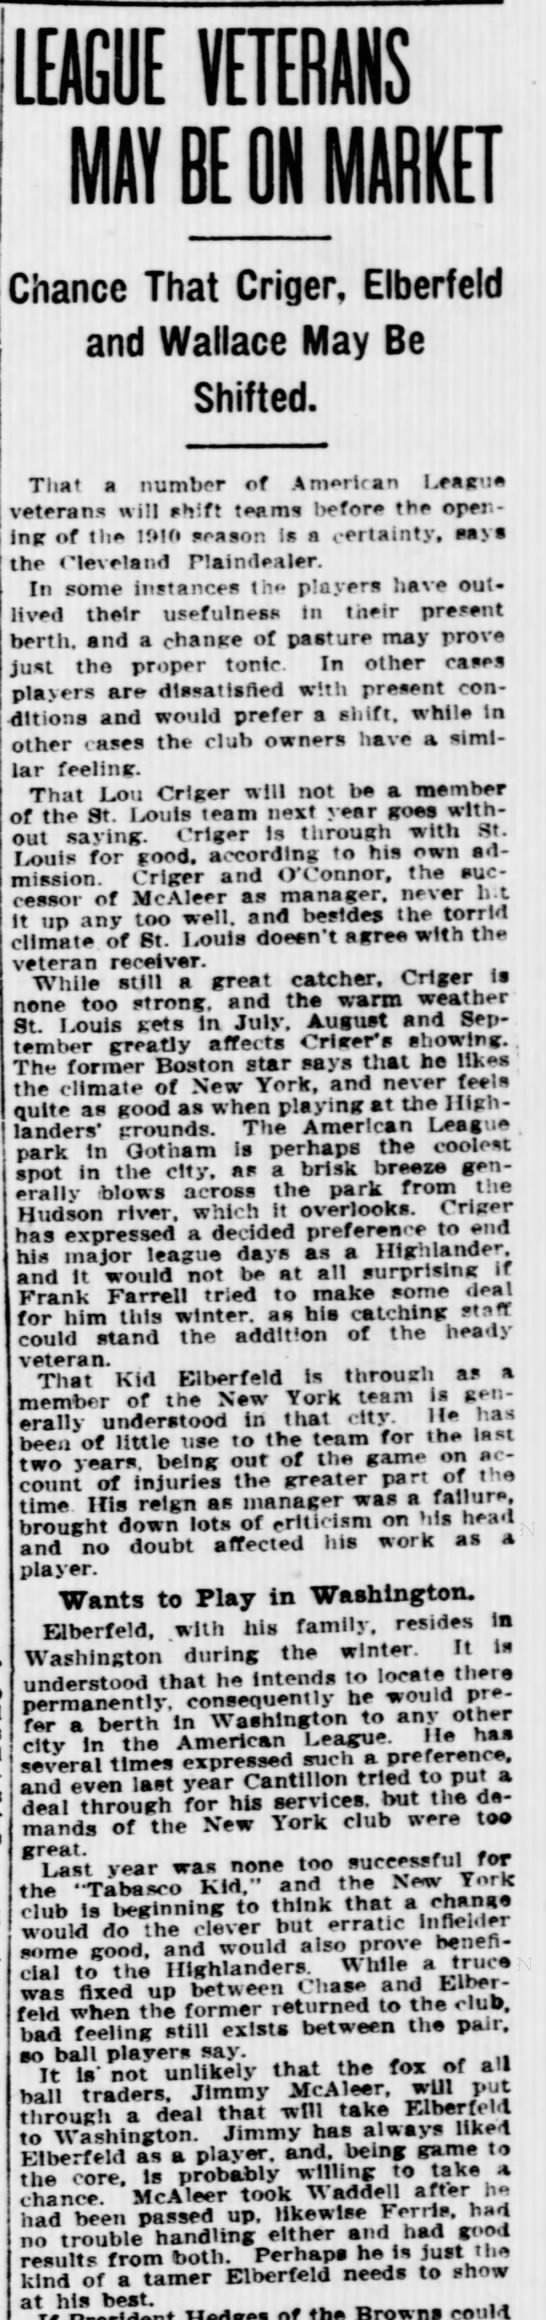 Evening Star (Washington, District of Columbia) 14 Nov 1909, Sun Page 64
- Elberfeld out of NY - 